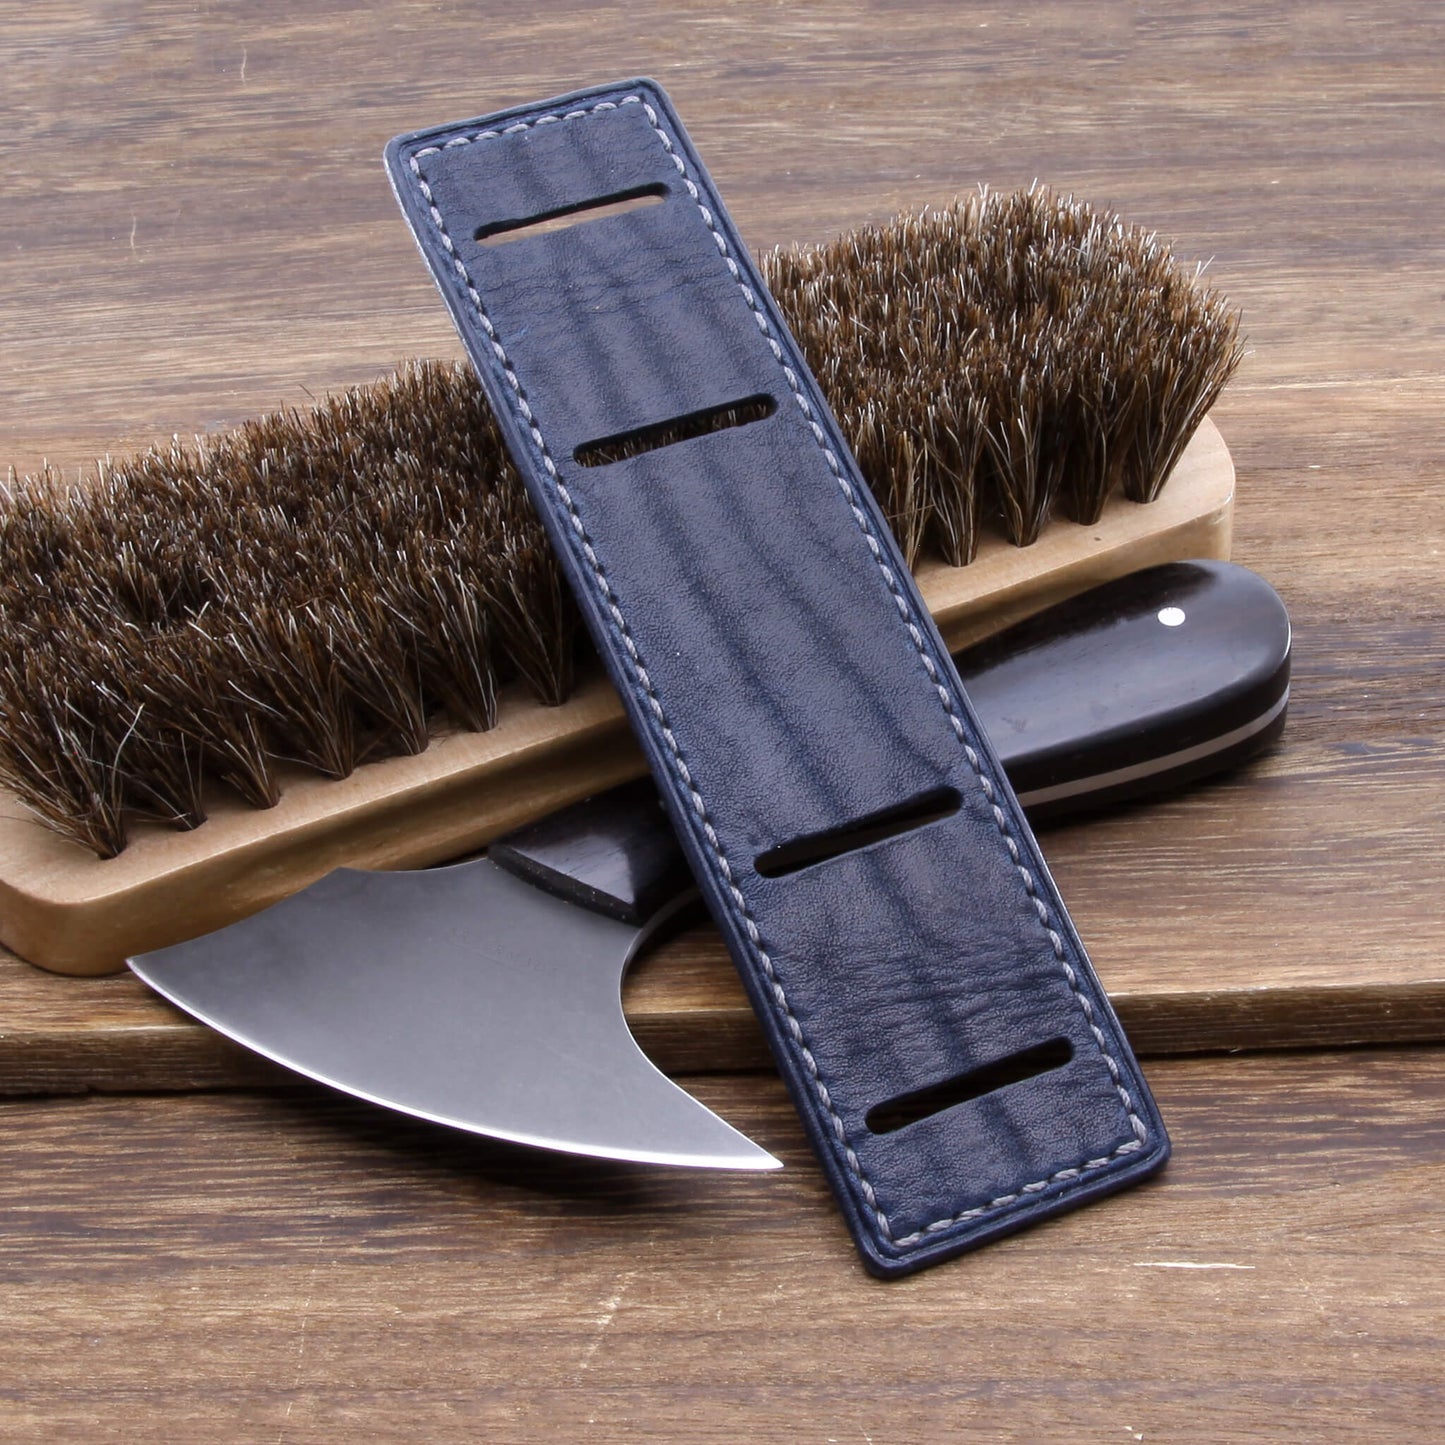 Leather bund pad in Newman Style Vintage 407 Dark Blue (timepiece for illustrative purposes only) | Full stitch construction, made with full grain Italian veg-tanned leather